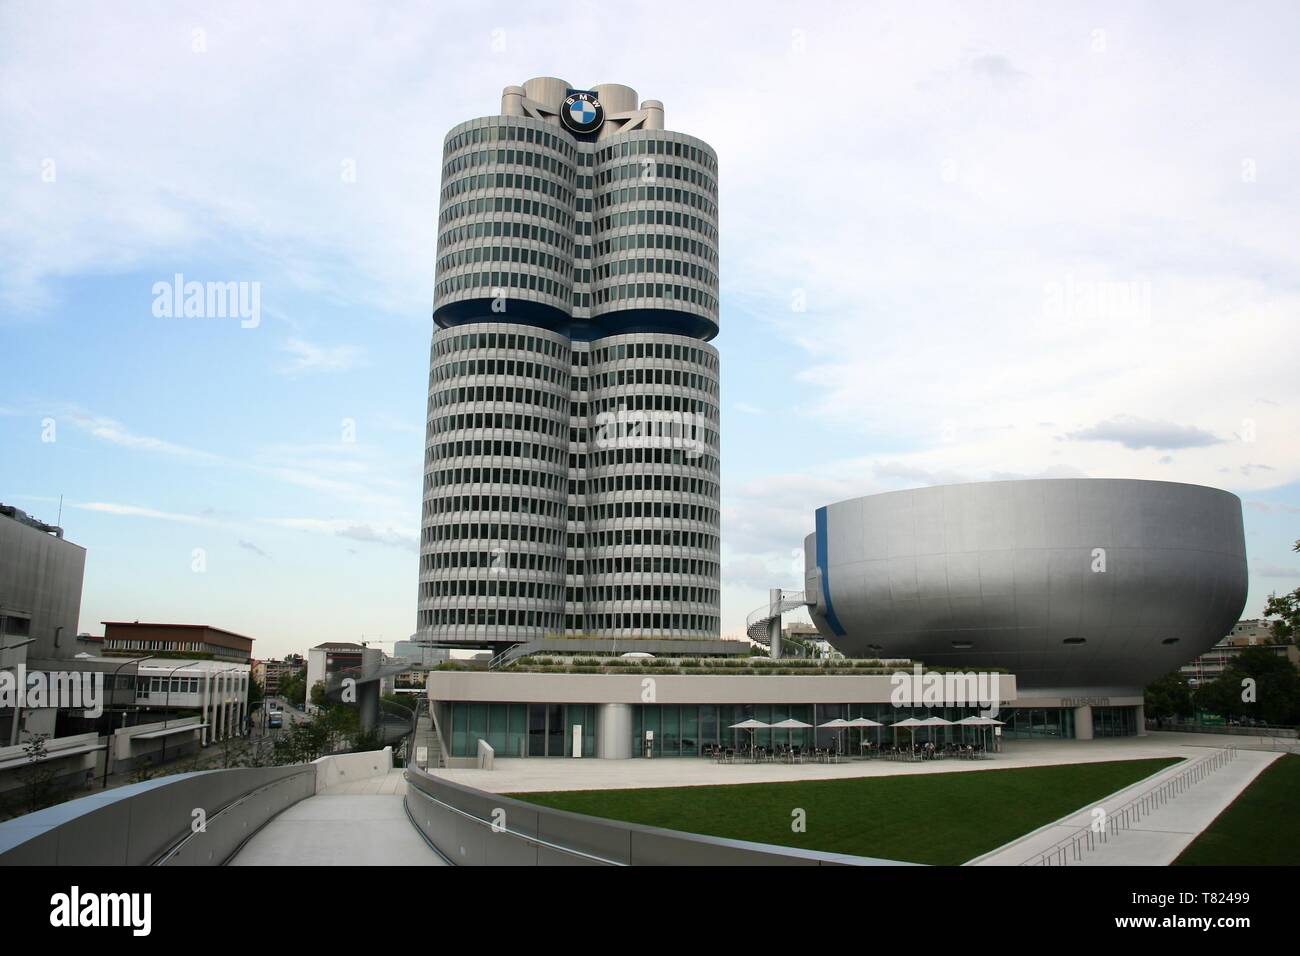 MUNICH, GERMANY - AUGUST 7, 2008: BMW company headquarters in Munich, Germany. BMW is 12th largest producer of motor vehicles worldwide, with 2,279,50 Stock Photo